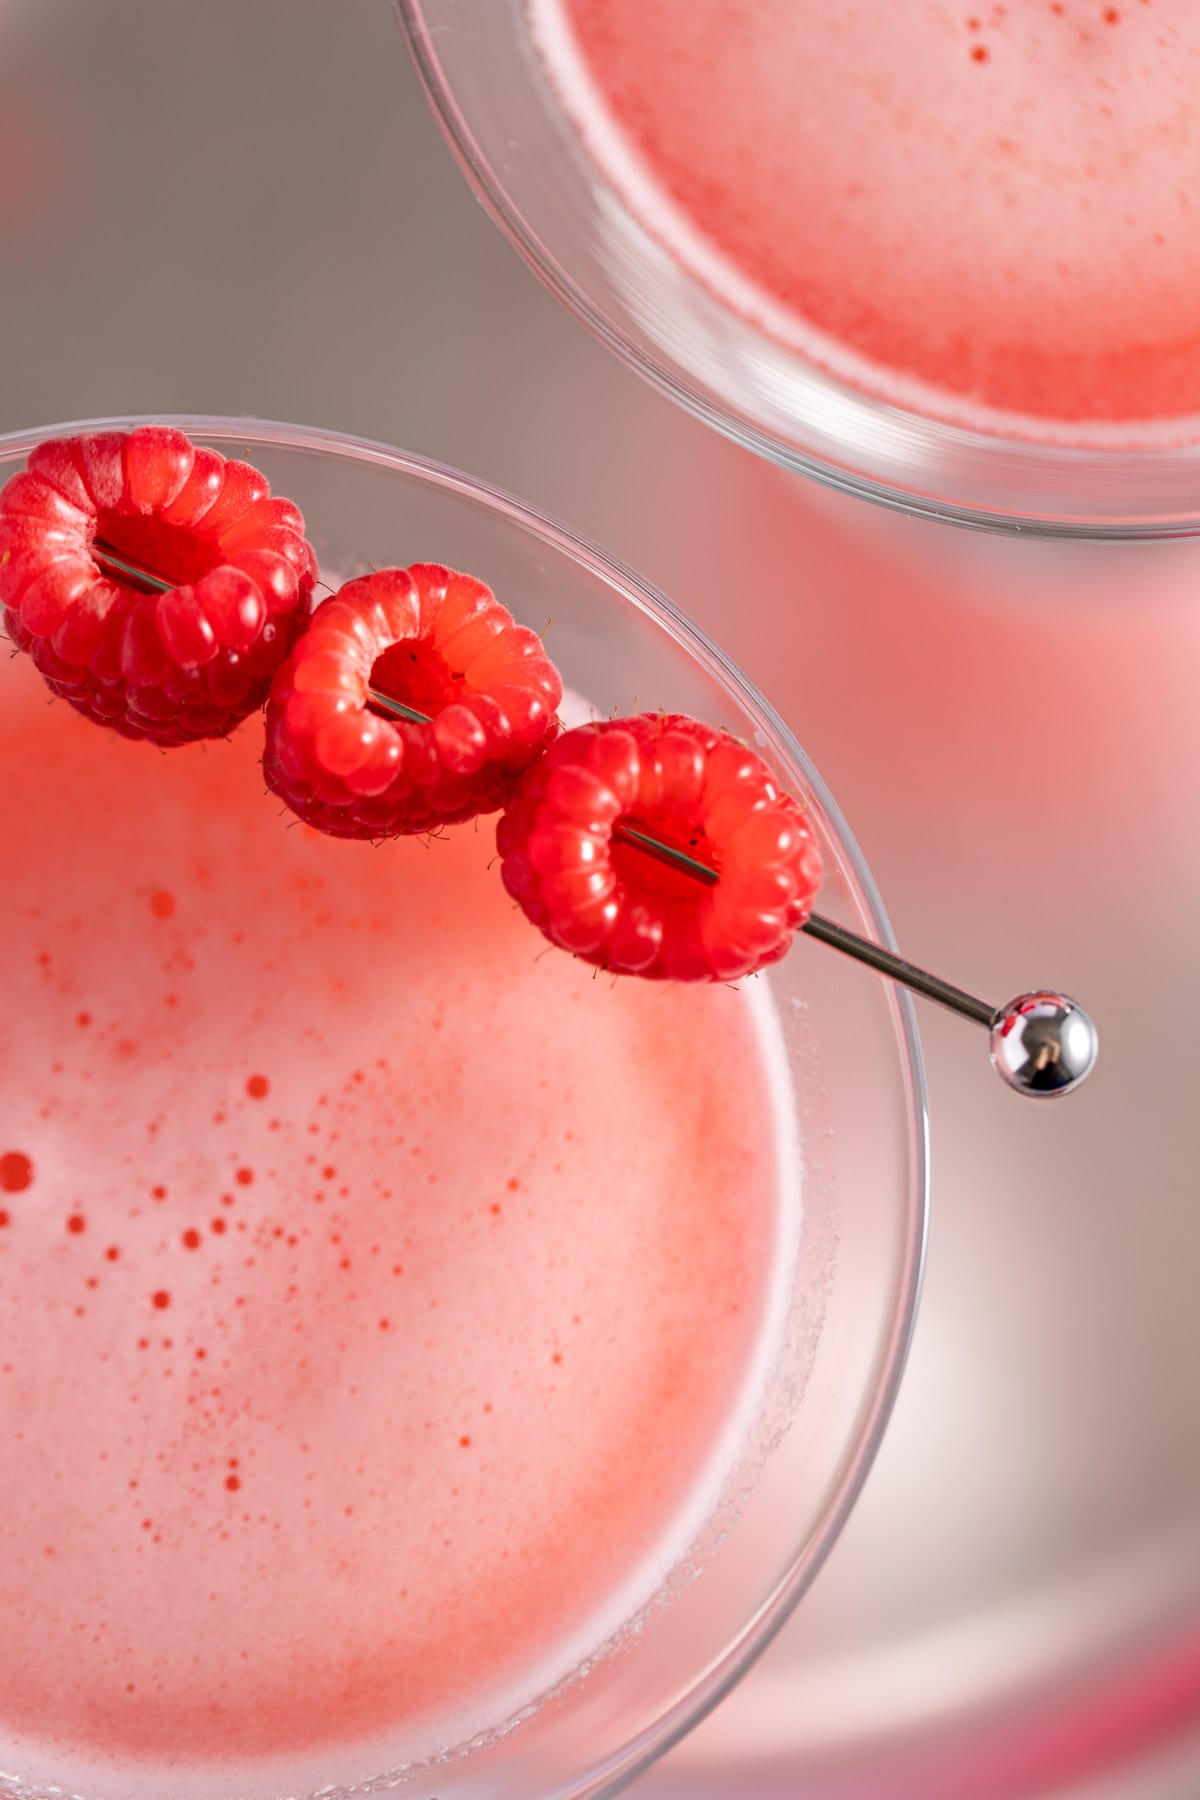 Up close view of the 3 raspberries garnishing a martini on a silver cocktail pick.